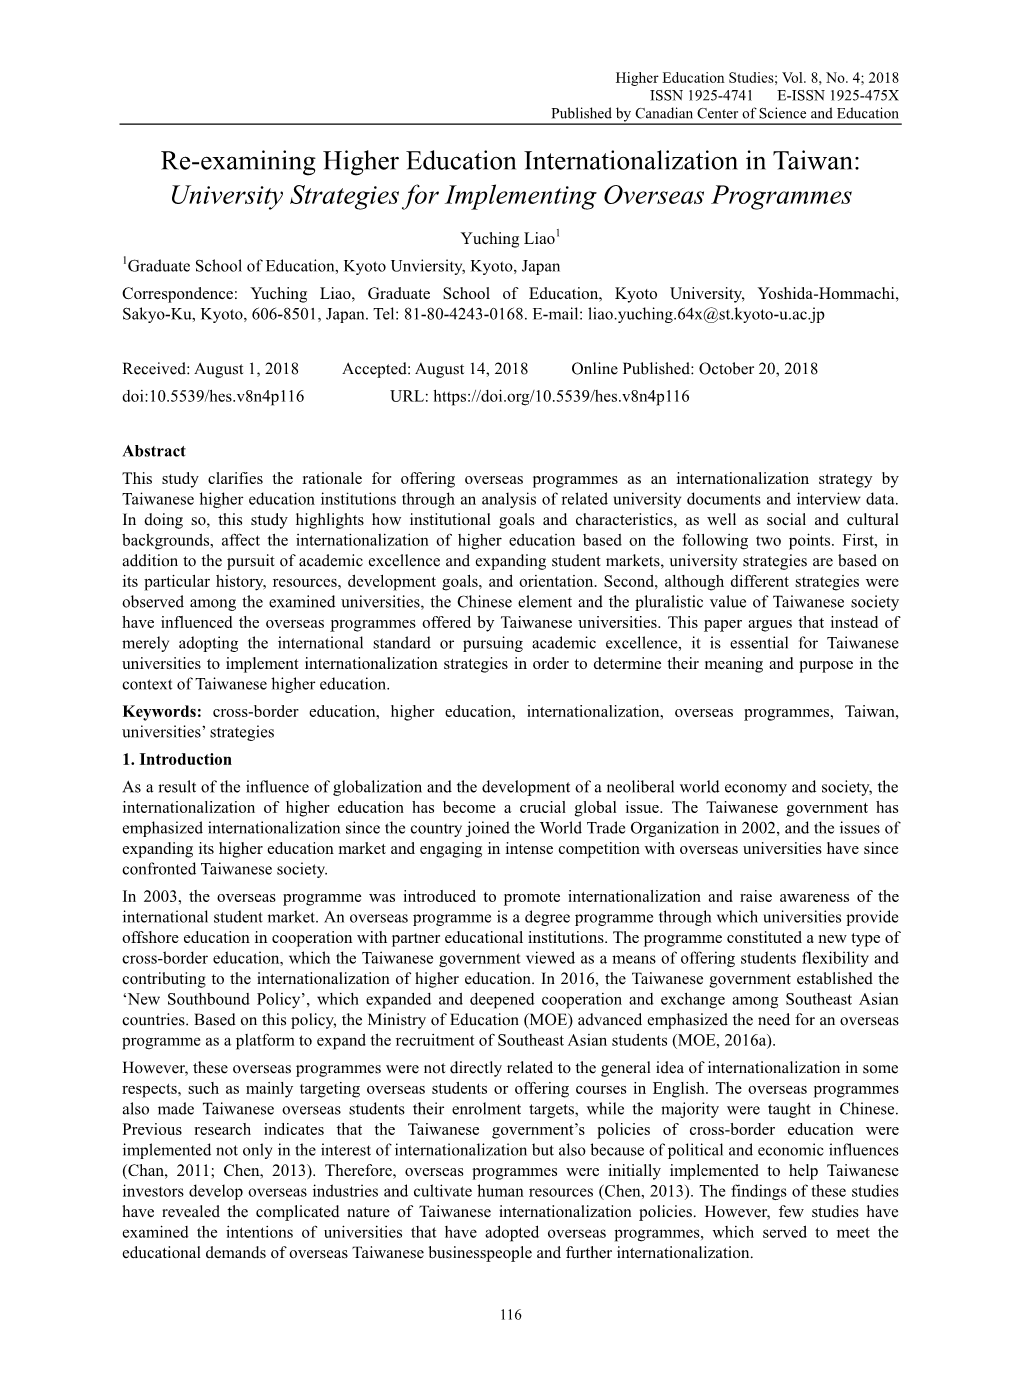 Re-Examining Higher Education Internationalization in Taiwan: University Strategies for Implementing Overseas Programmes